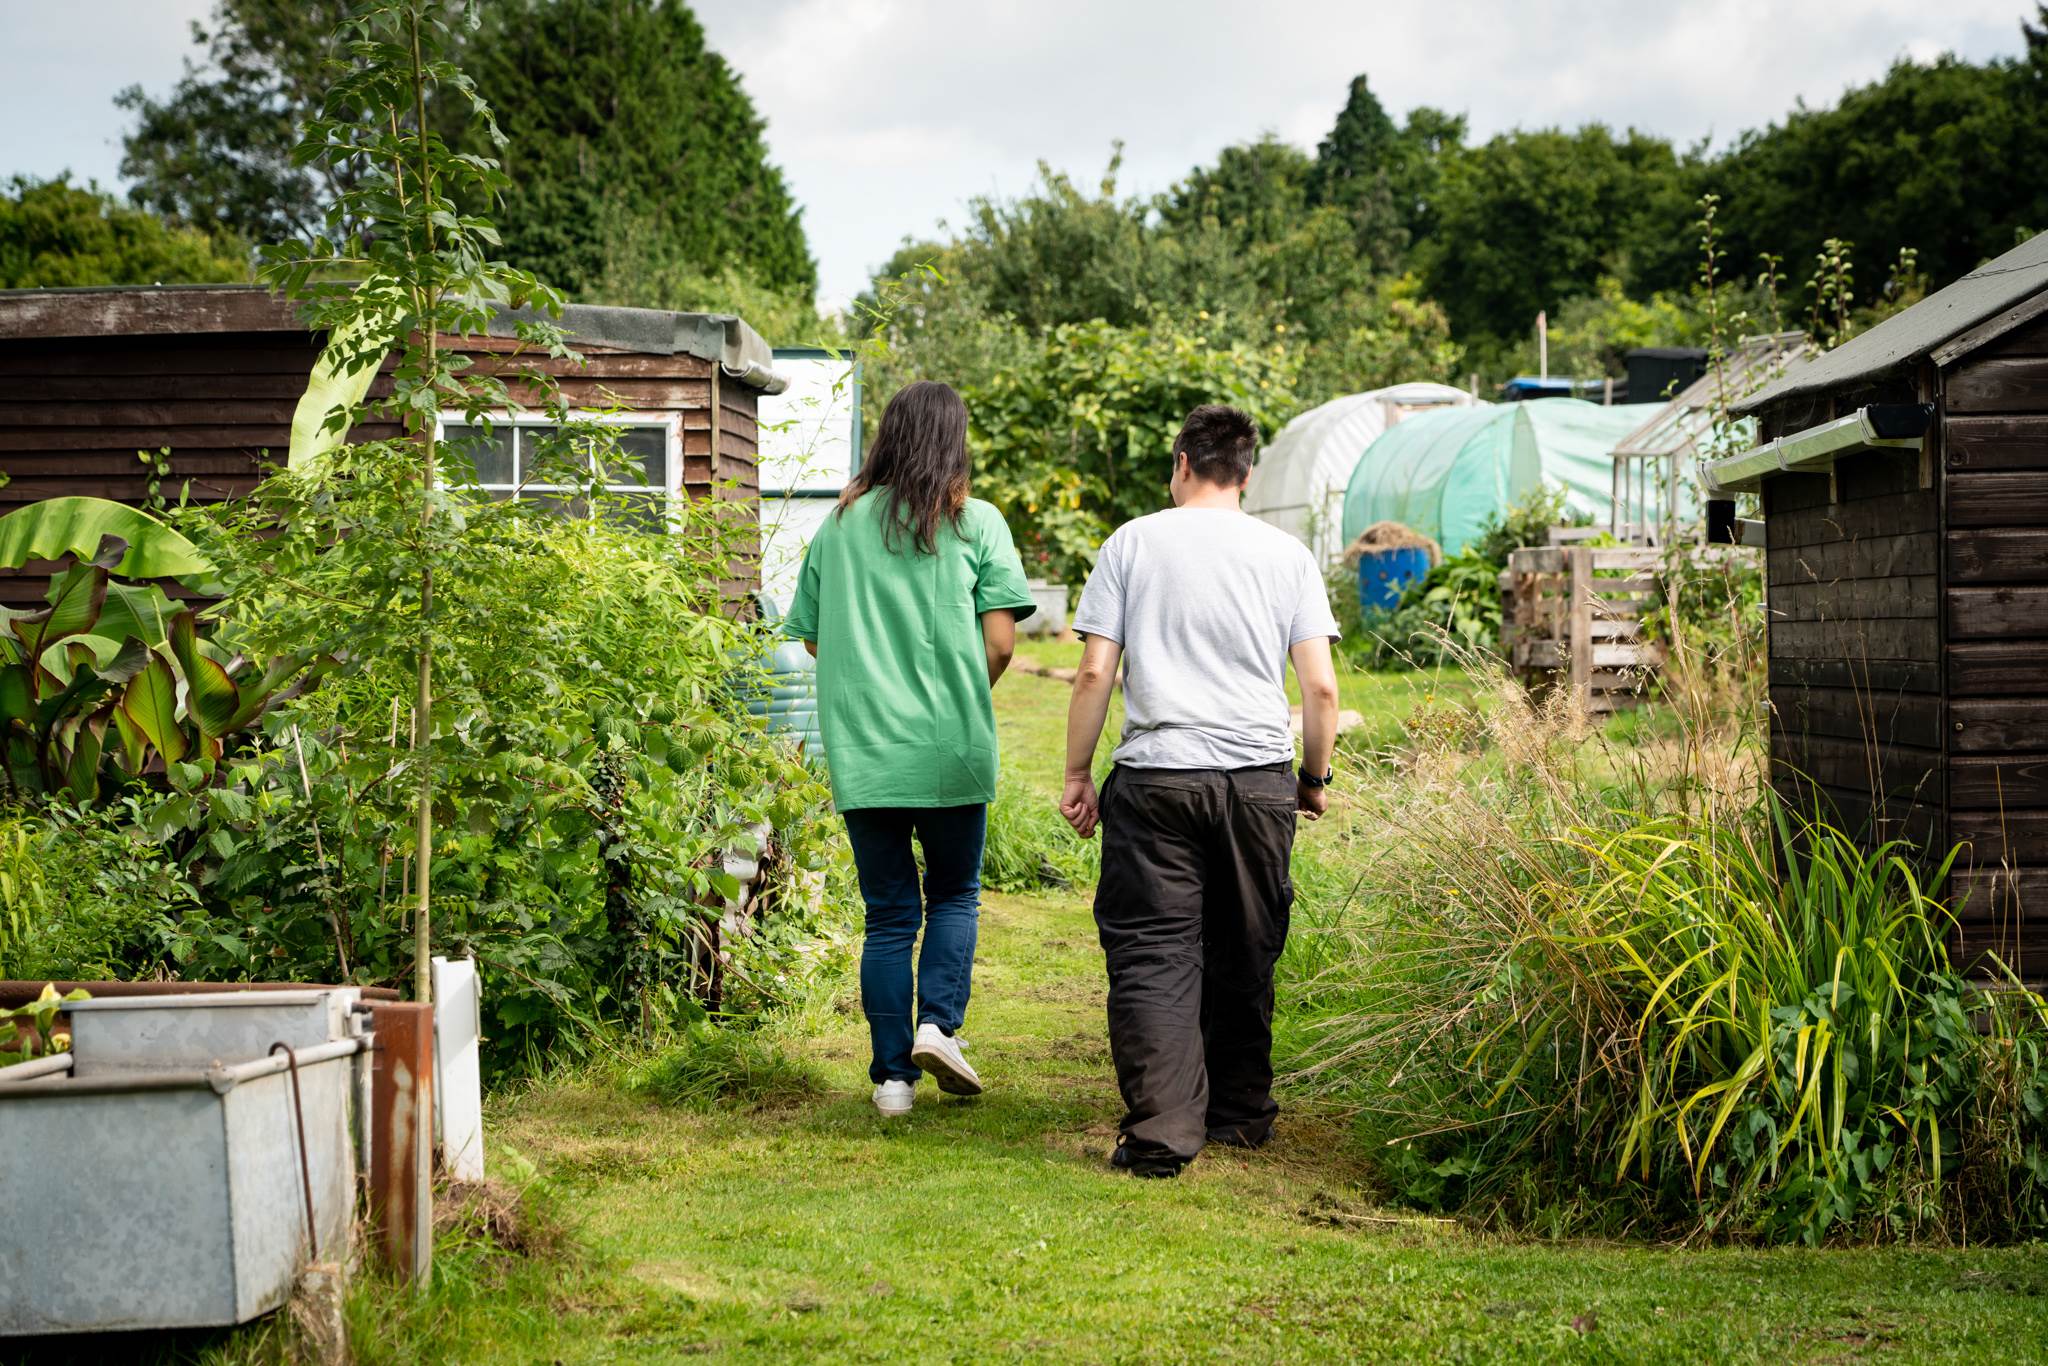 2 people walking through a Mind community allotment in the middle of summer, with healthy looking vegetables growing around them.